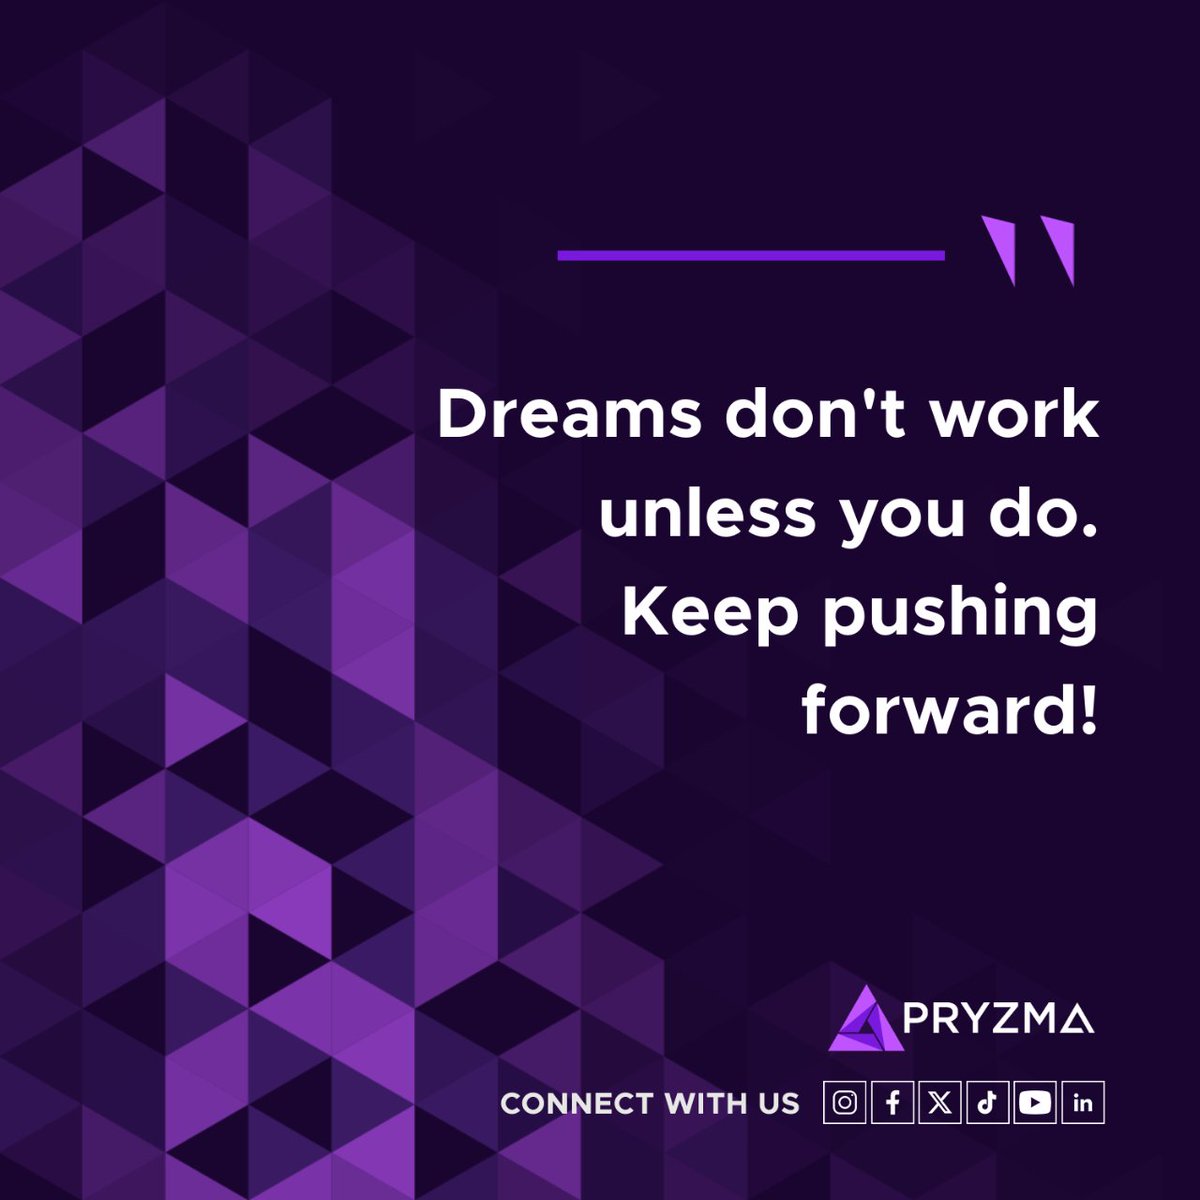 Don't wait for your dreams to come true, make them happen. Hard work is the key to turning your dreams into reality. Stay focused and keep pushing forward.

#ecommerce #ecommercebusiness #businessmotivation #amazonfba #amazonseller #ebayseller #walmartseller #pryzma